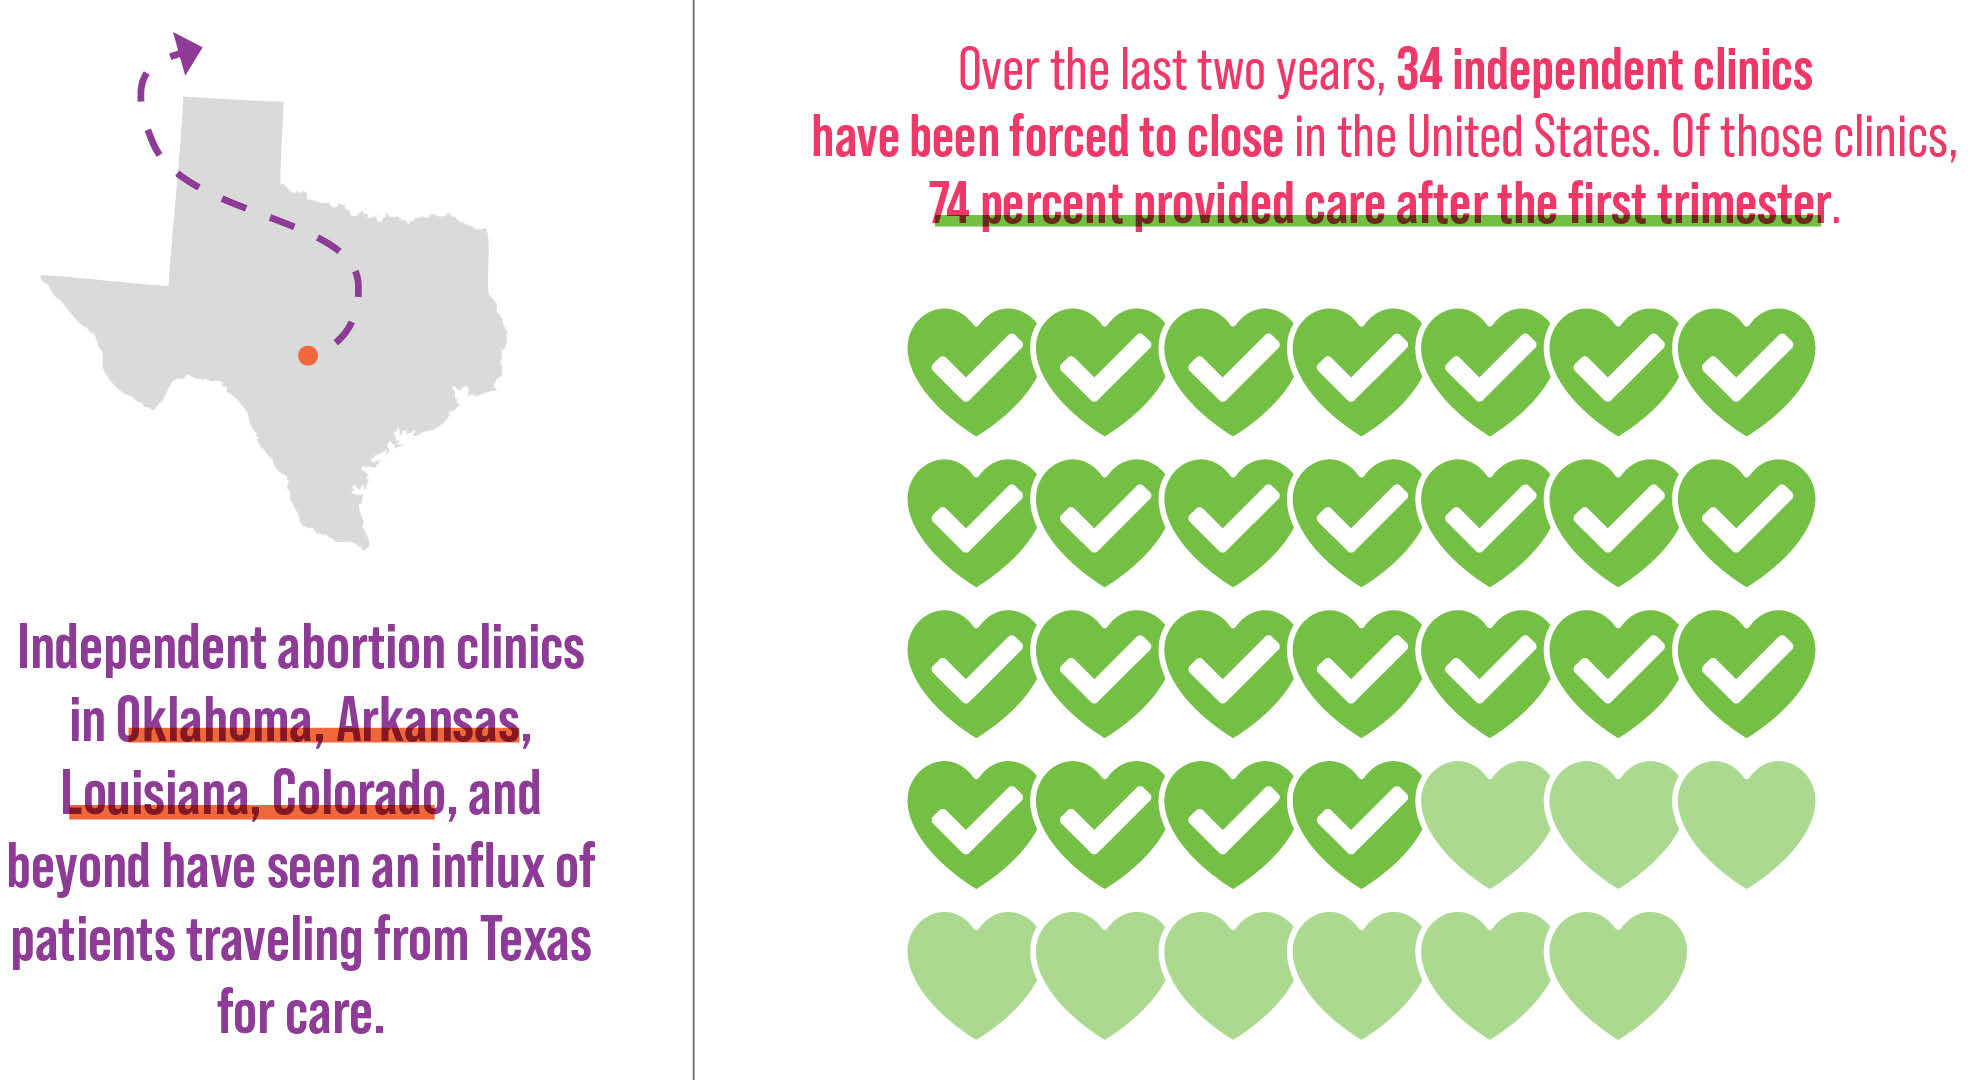 Two data vizualizations depicting that 34 independent clinics have been forced to close over the past two years, of which 74% provided care after the first trimester; and that independent clinics in states surrounding Texas have seen an influx of patients.